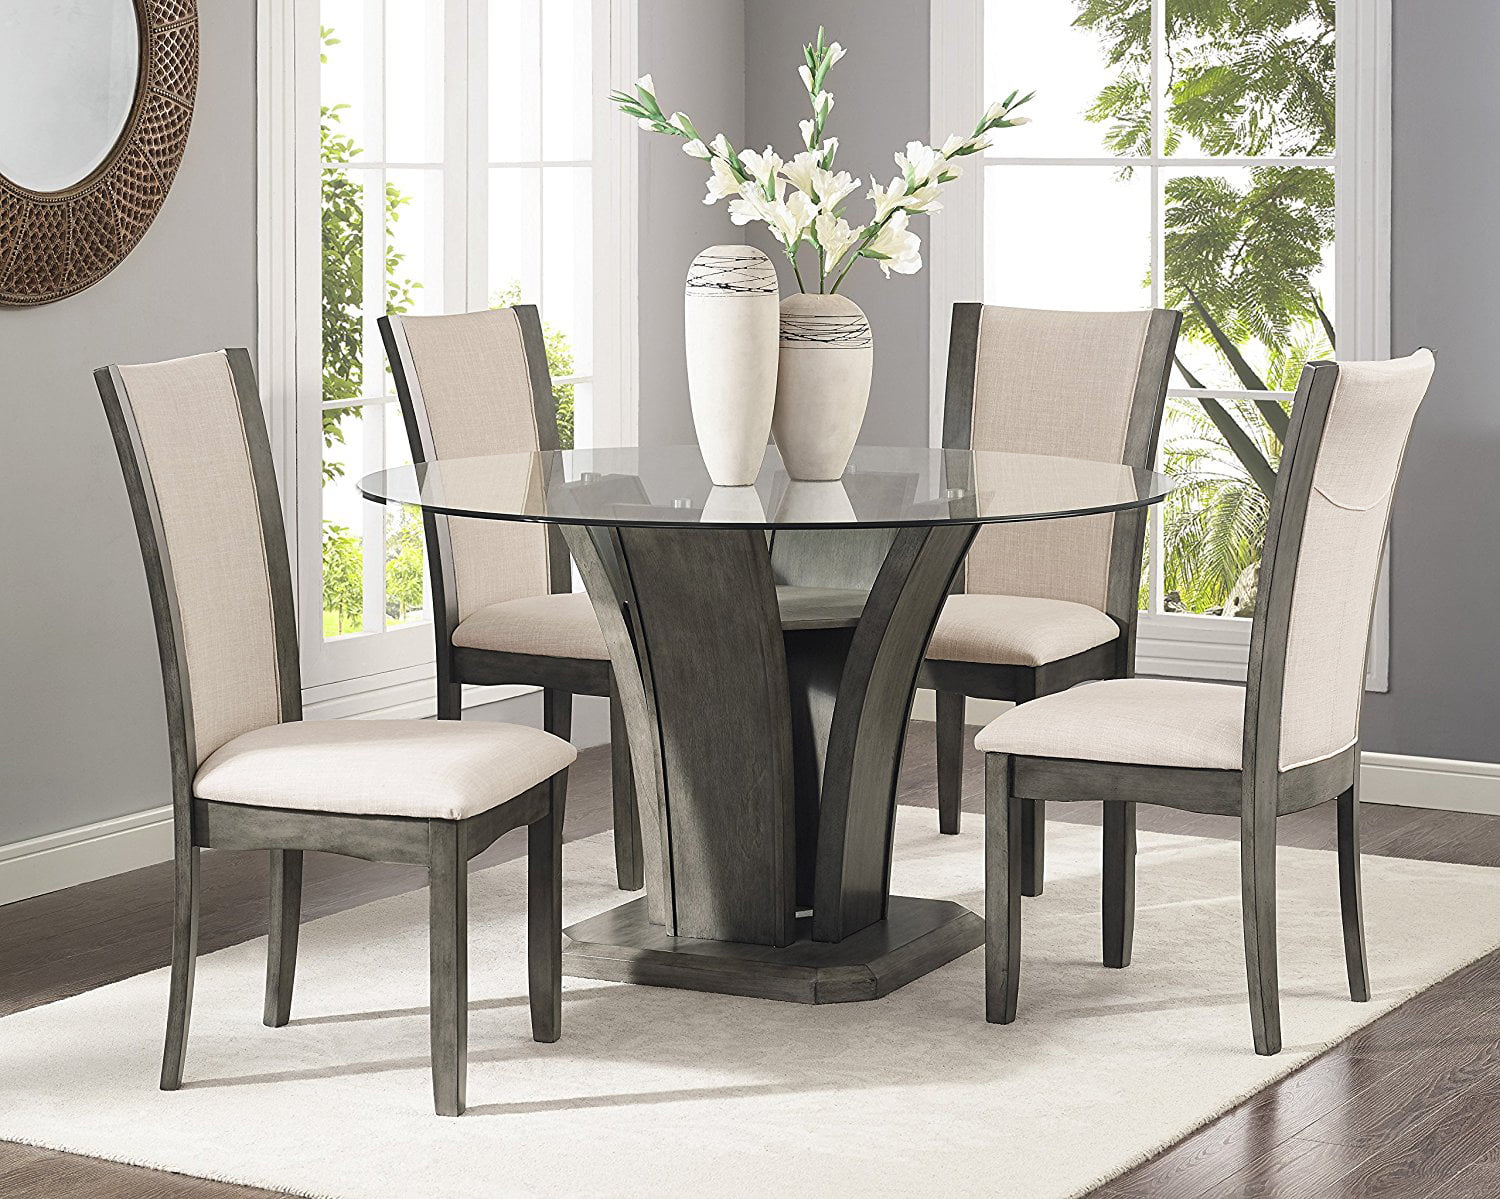 Roundhill Kecco Grey 5 Piece Glass Top Dining Set